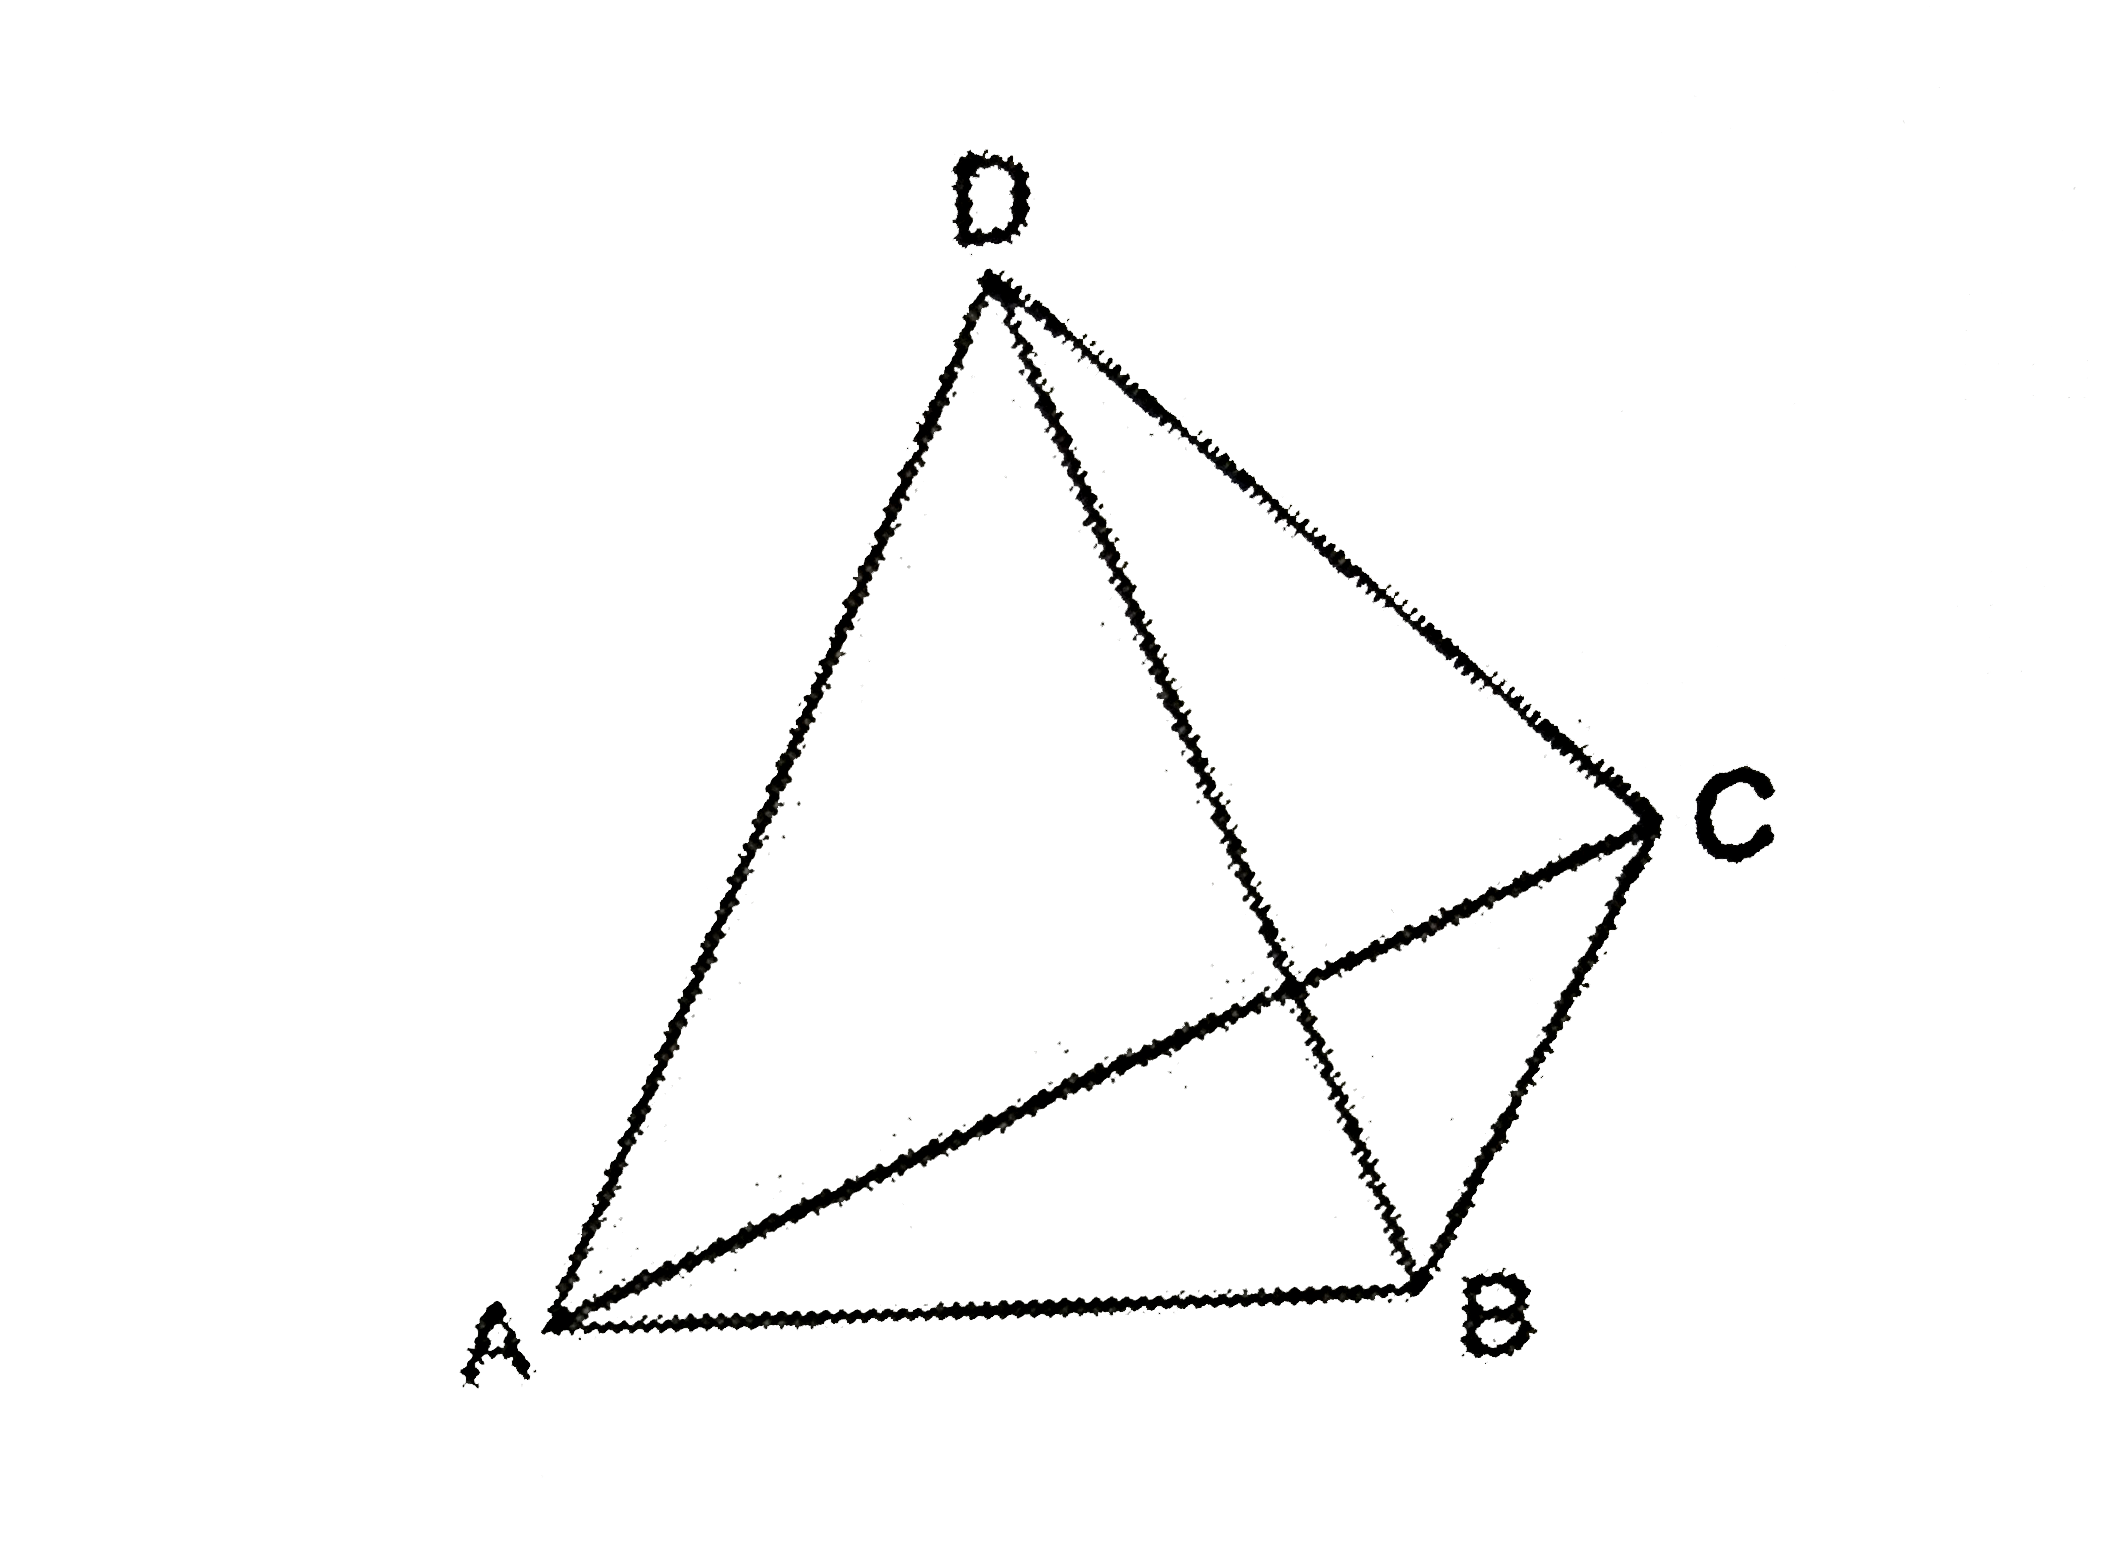 Six identical wires of resistance R each are joined to form a pyramid, as shown in the figure above